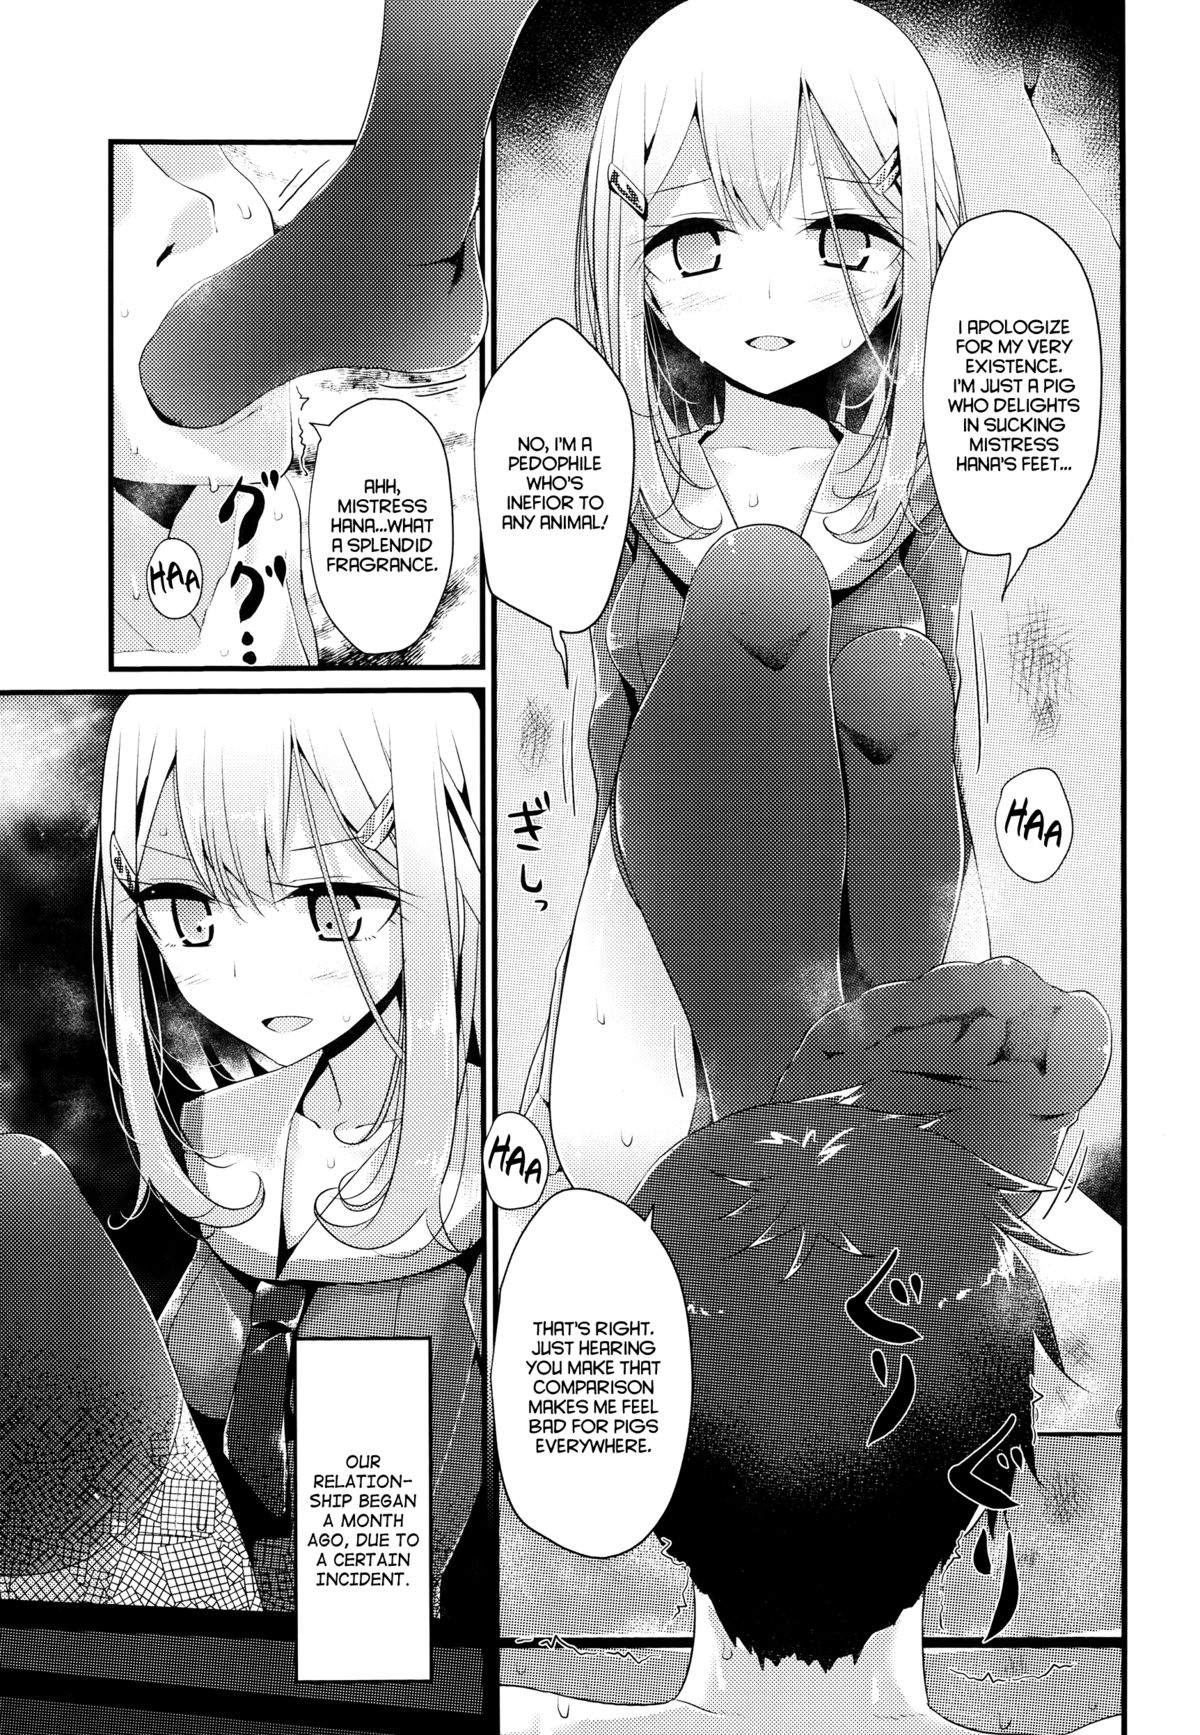 [Oouso] Olfactophilia (Girls forM Vol. 06) [English] =LWB= page 5 full